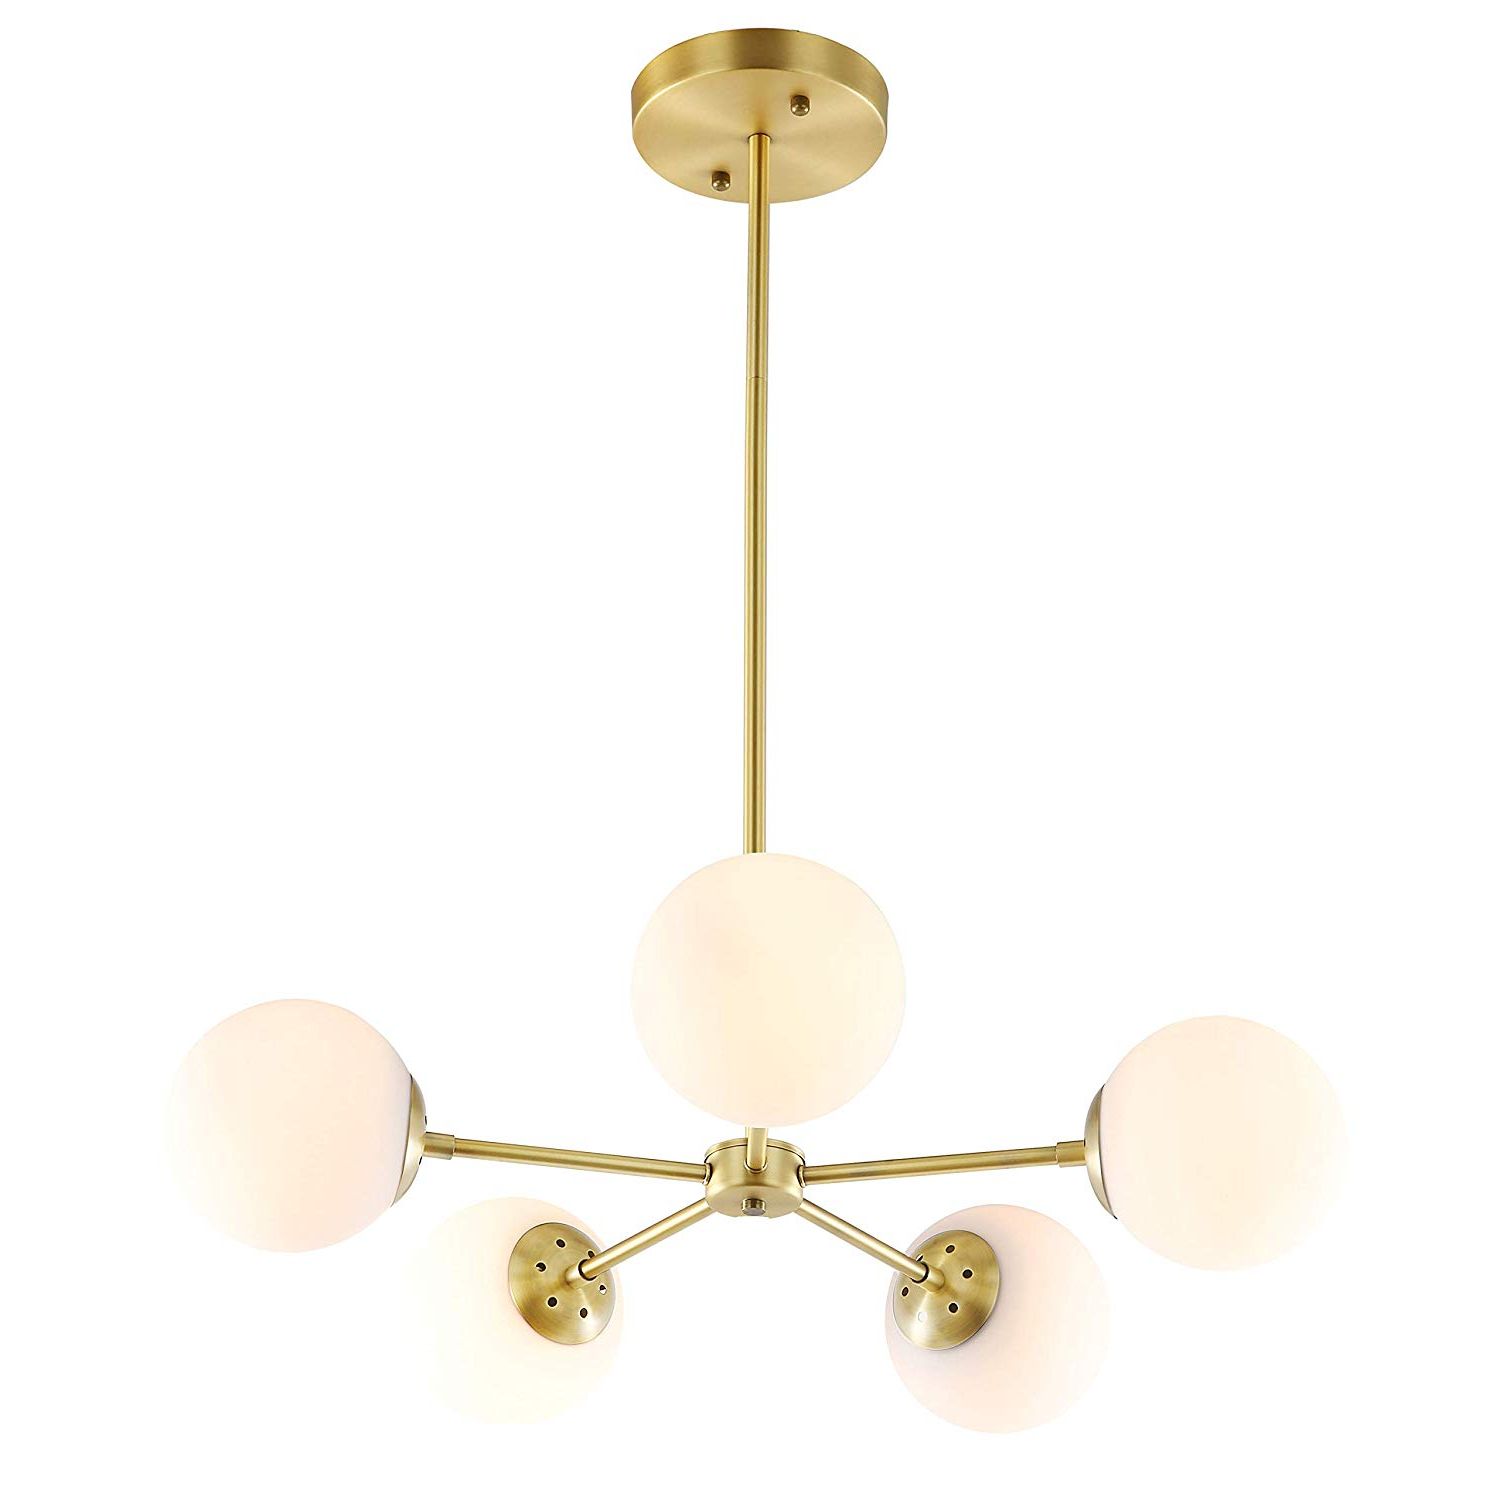 Thresa 5 Light Shaded Chandeliers Within Most Current Light Society Grammercy 5 Light Chandelier Pendant, Brushed Brass With  White Frosted Globes, Classic Mid Century Modern Lighting Fixture (View 20 of 25)